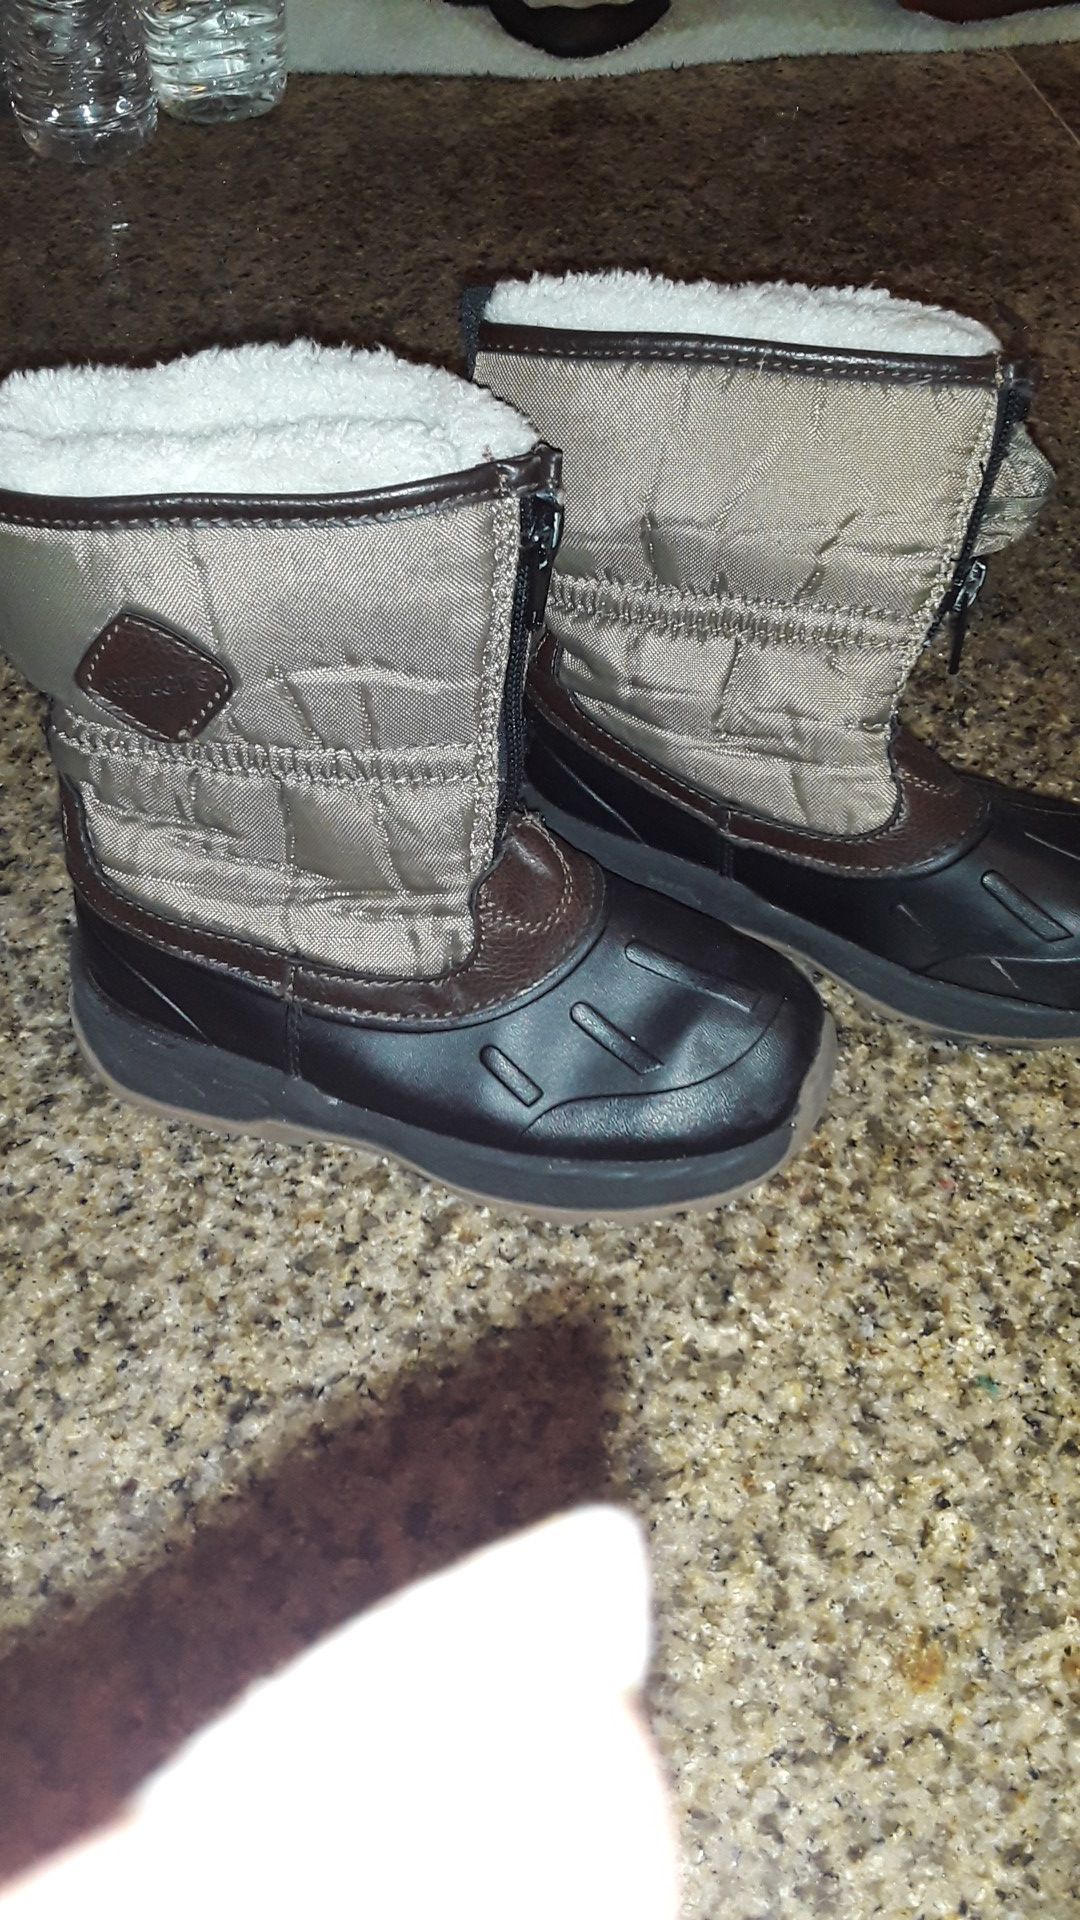 Carters size 11 snow boots 15